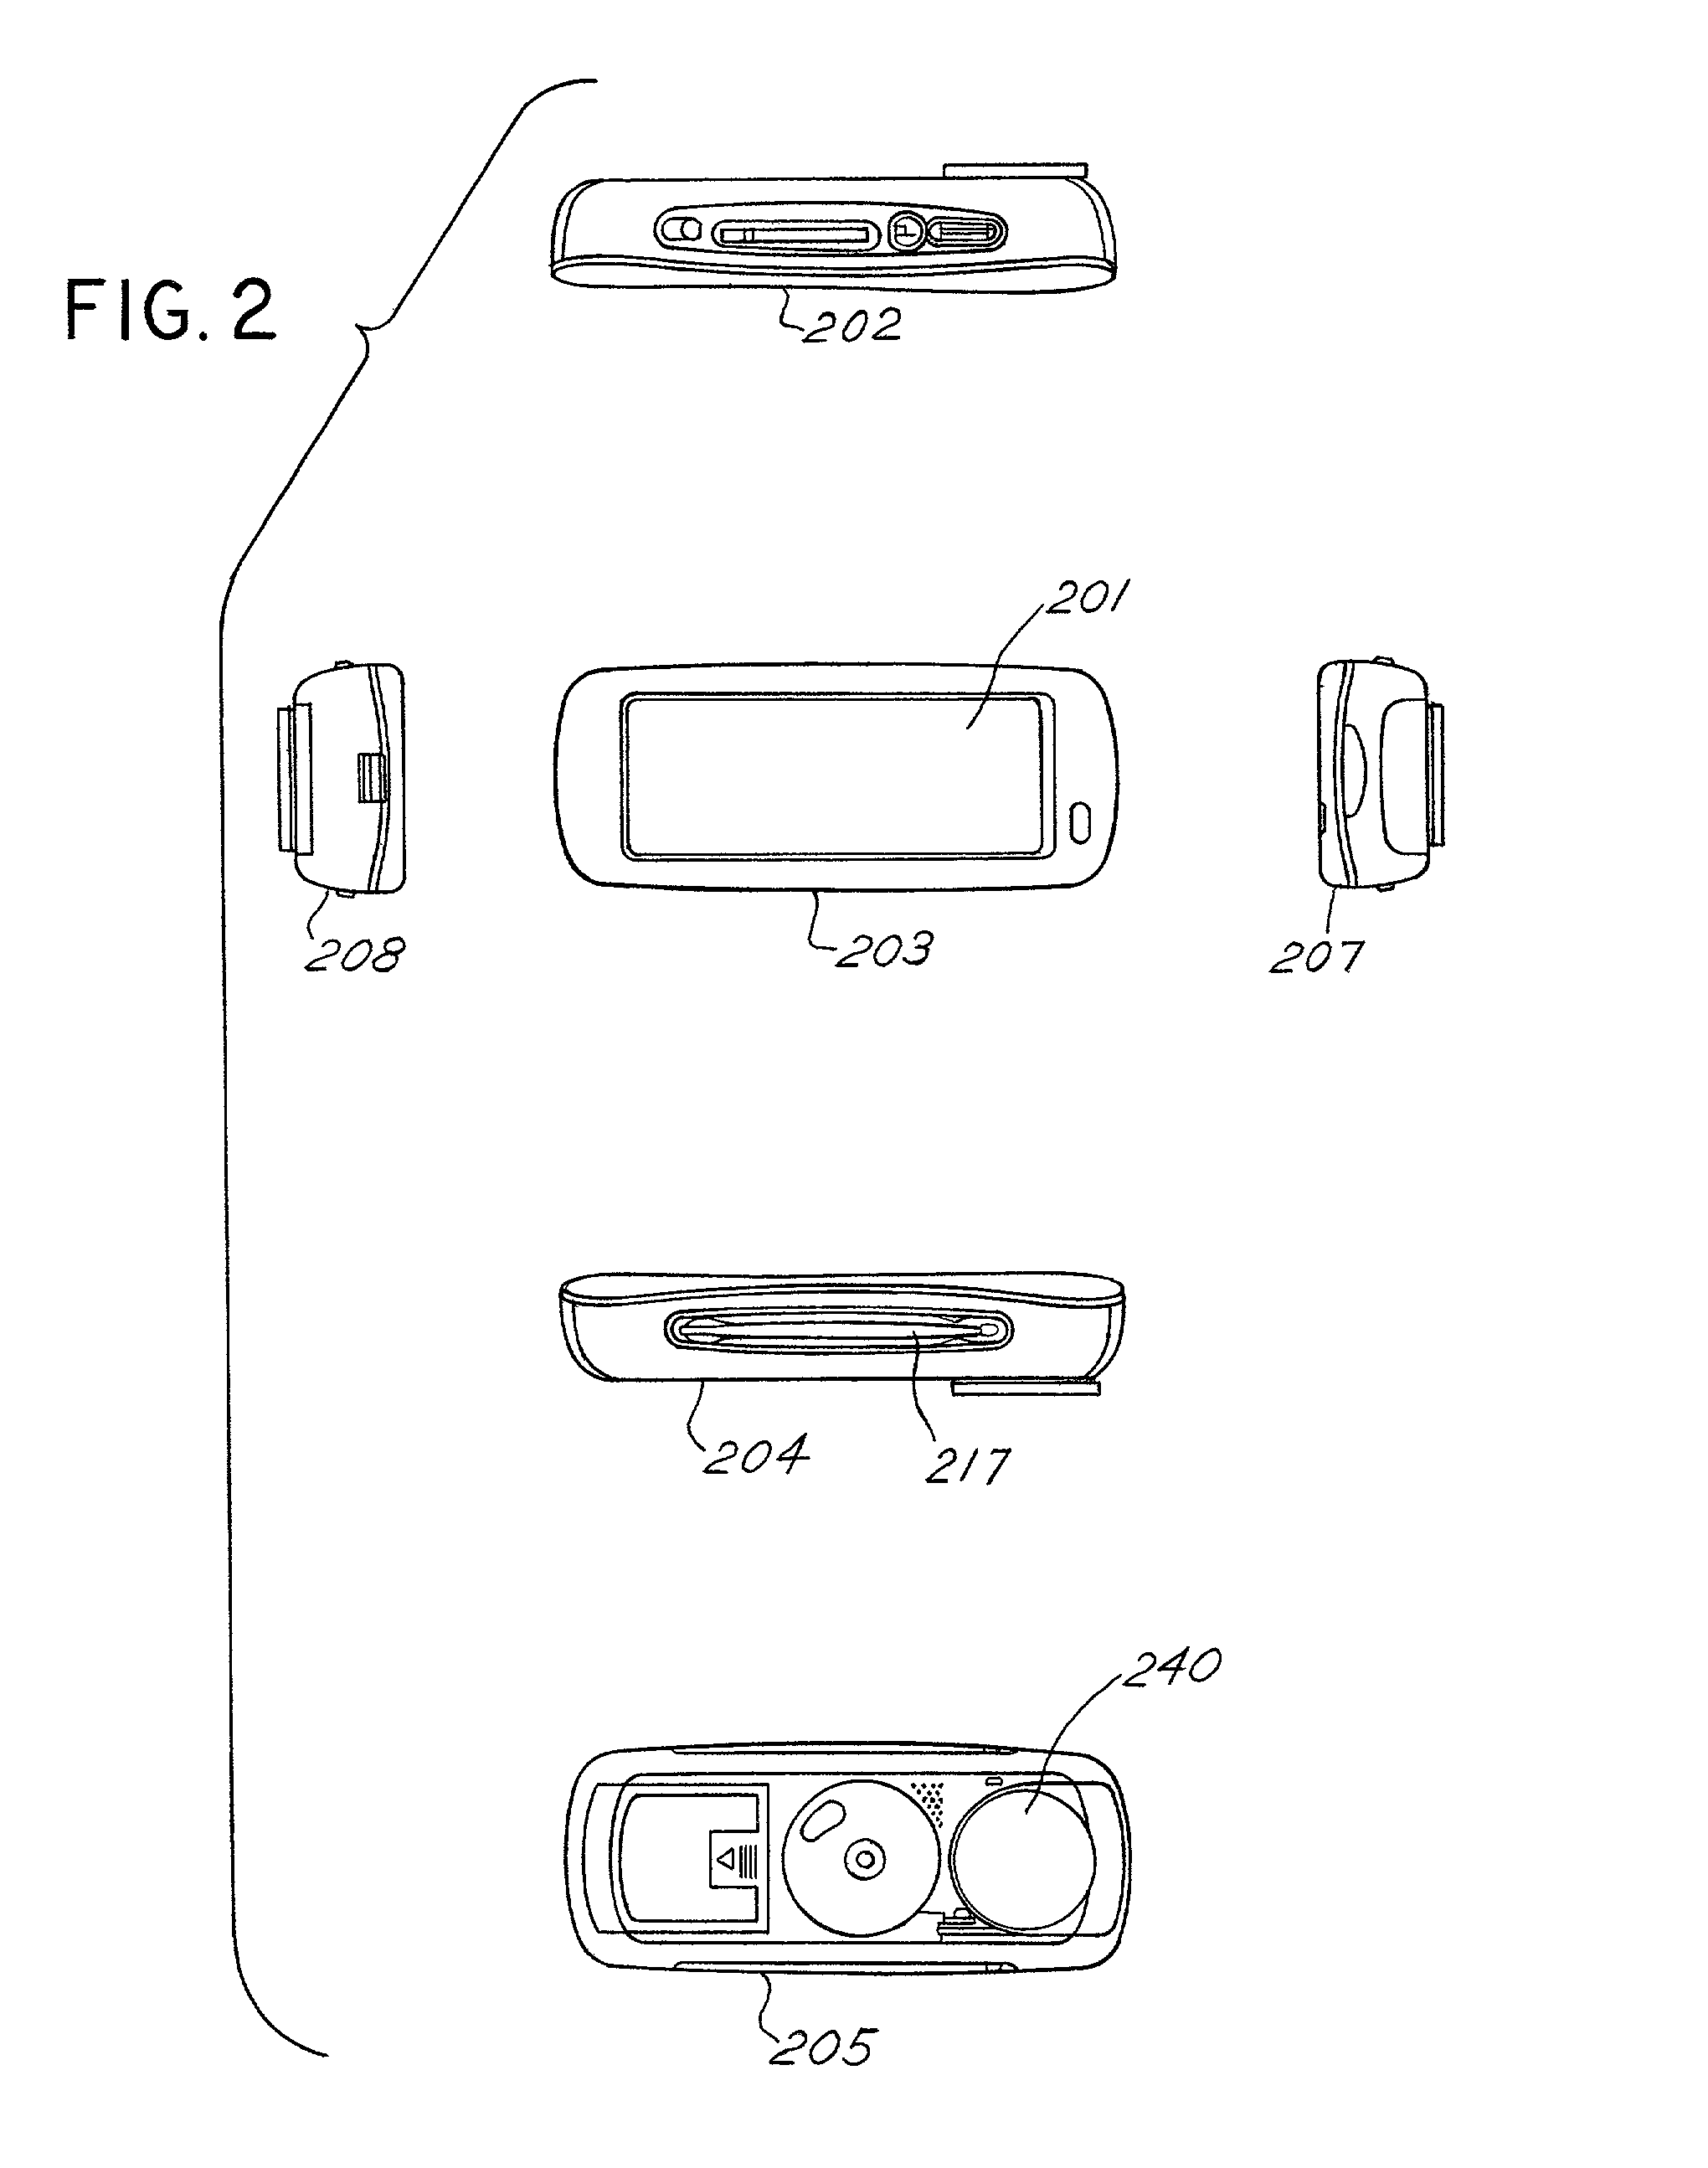 Telemetry module with configurable data layer for use with an implantable medical device